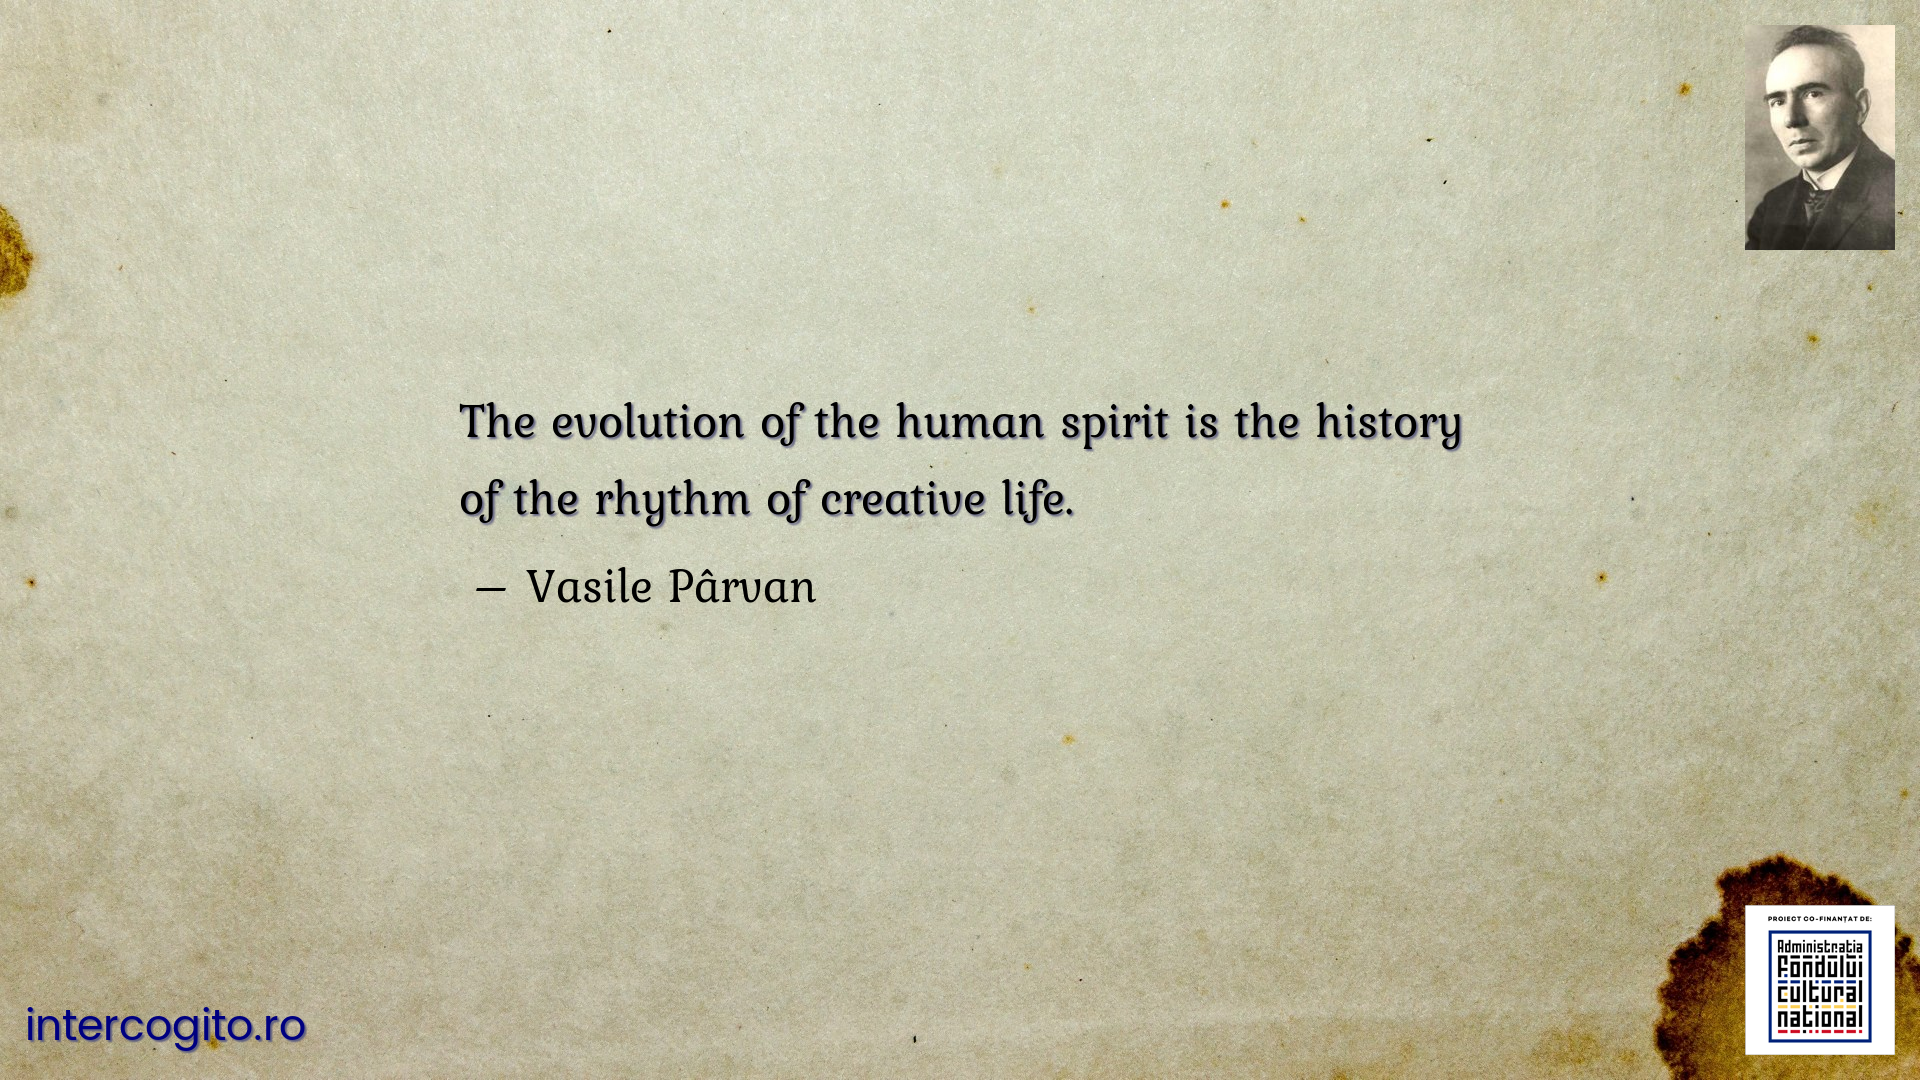 The evolution of the human spirit is the history of the rhythm of creative life.